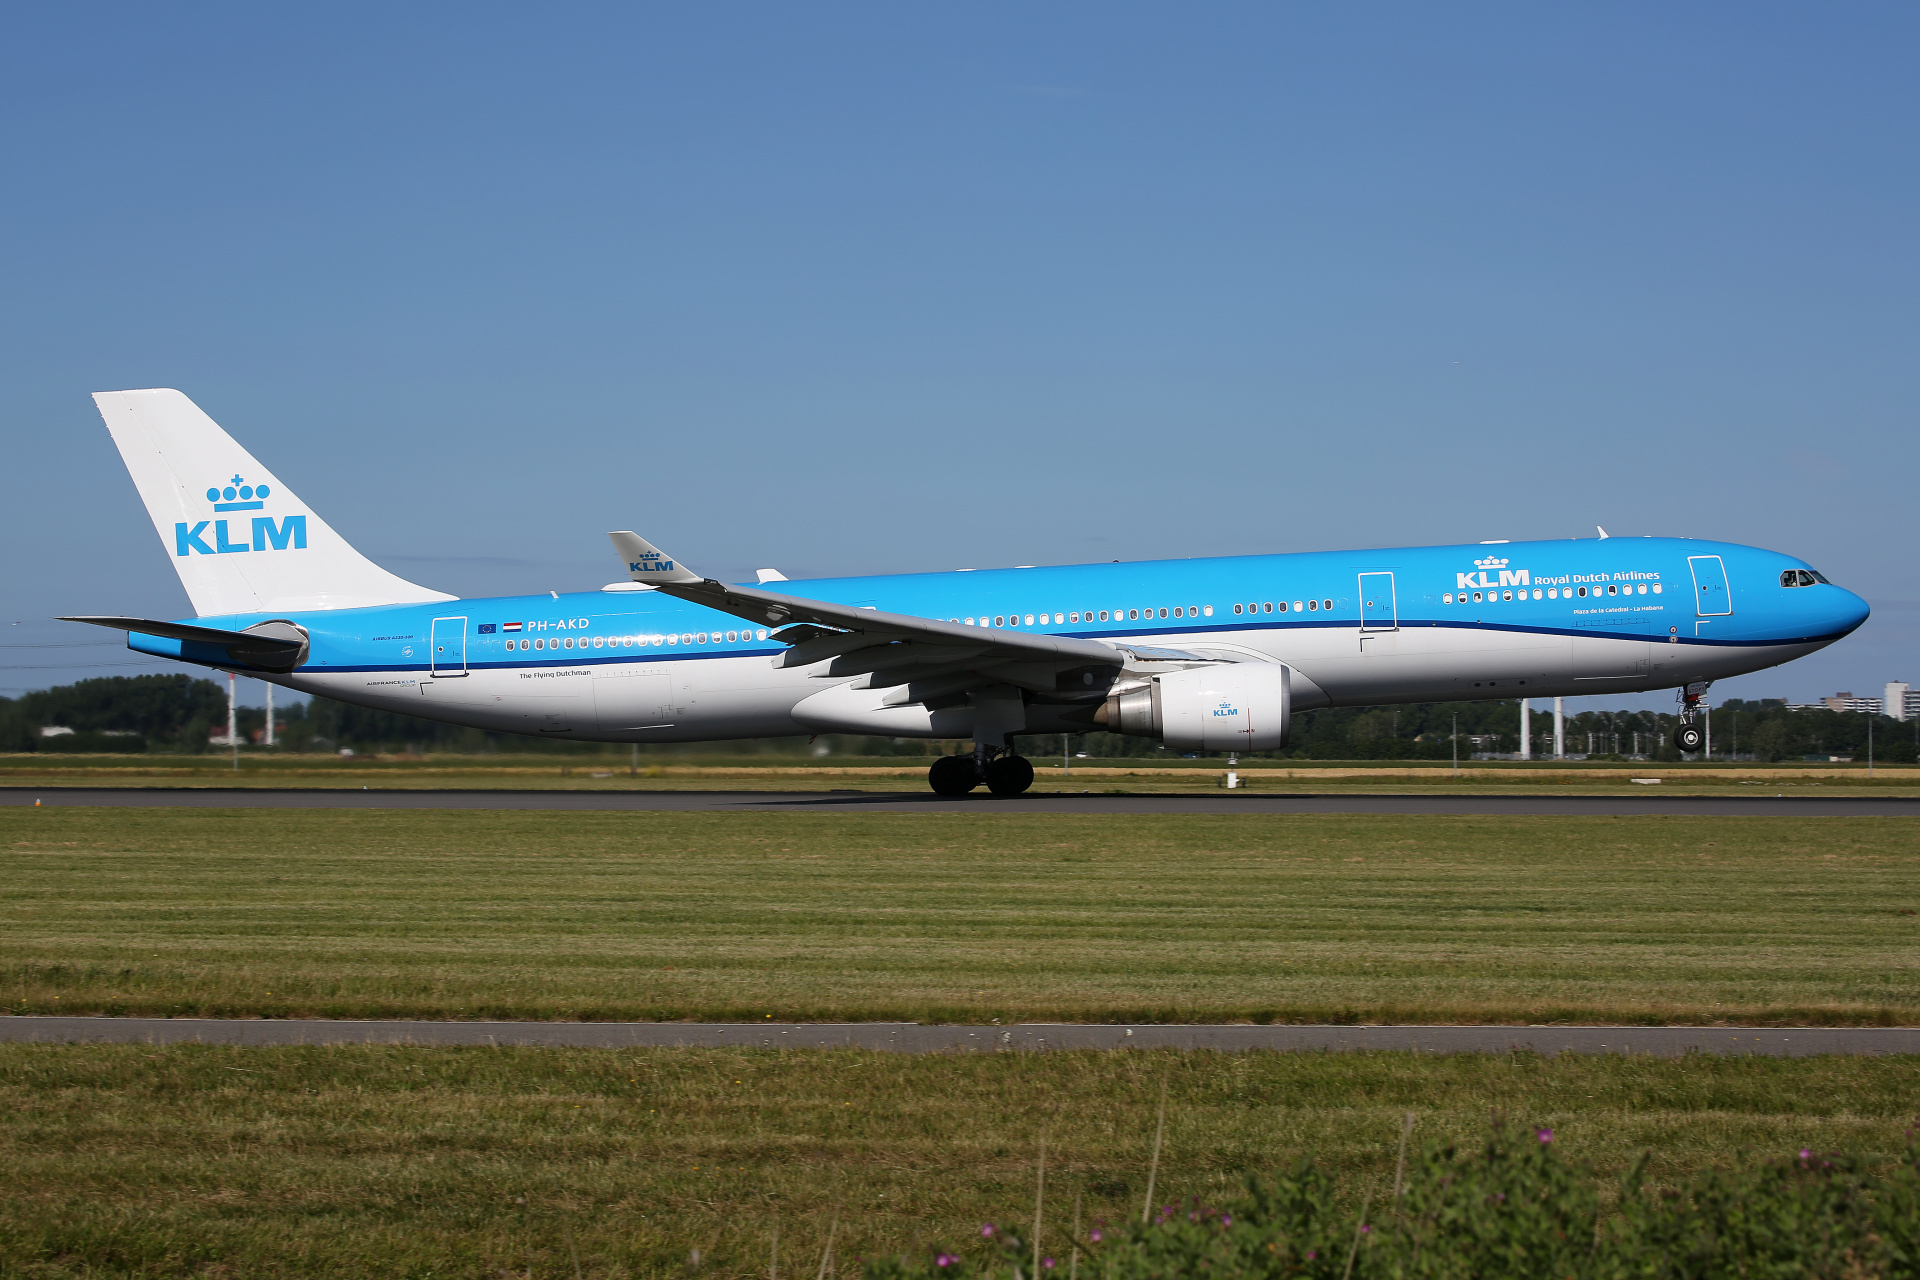 PH-AKD (new livery) (Aircraft » Schiphol Spotting » Airbus A330-300 » KLM Royal Dutch Airlines)